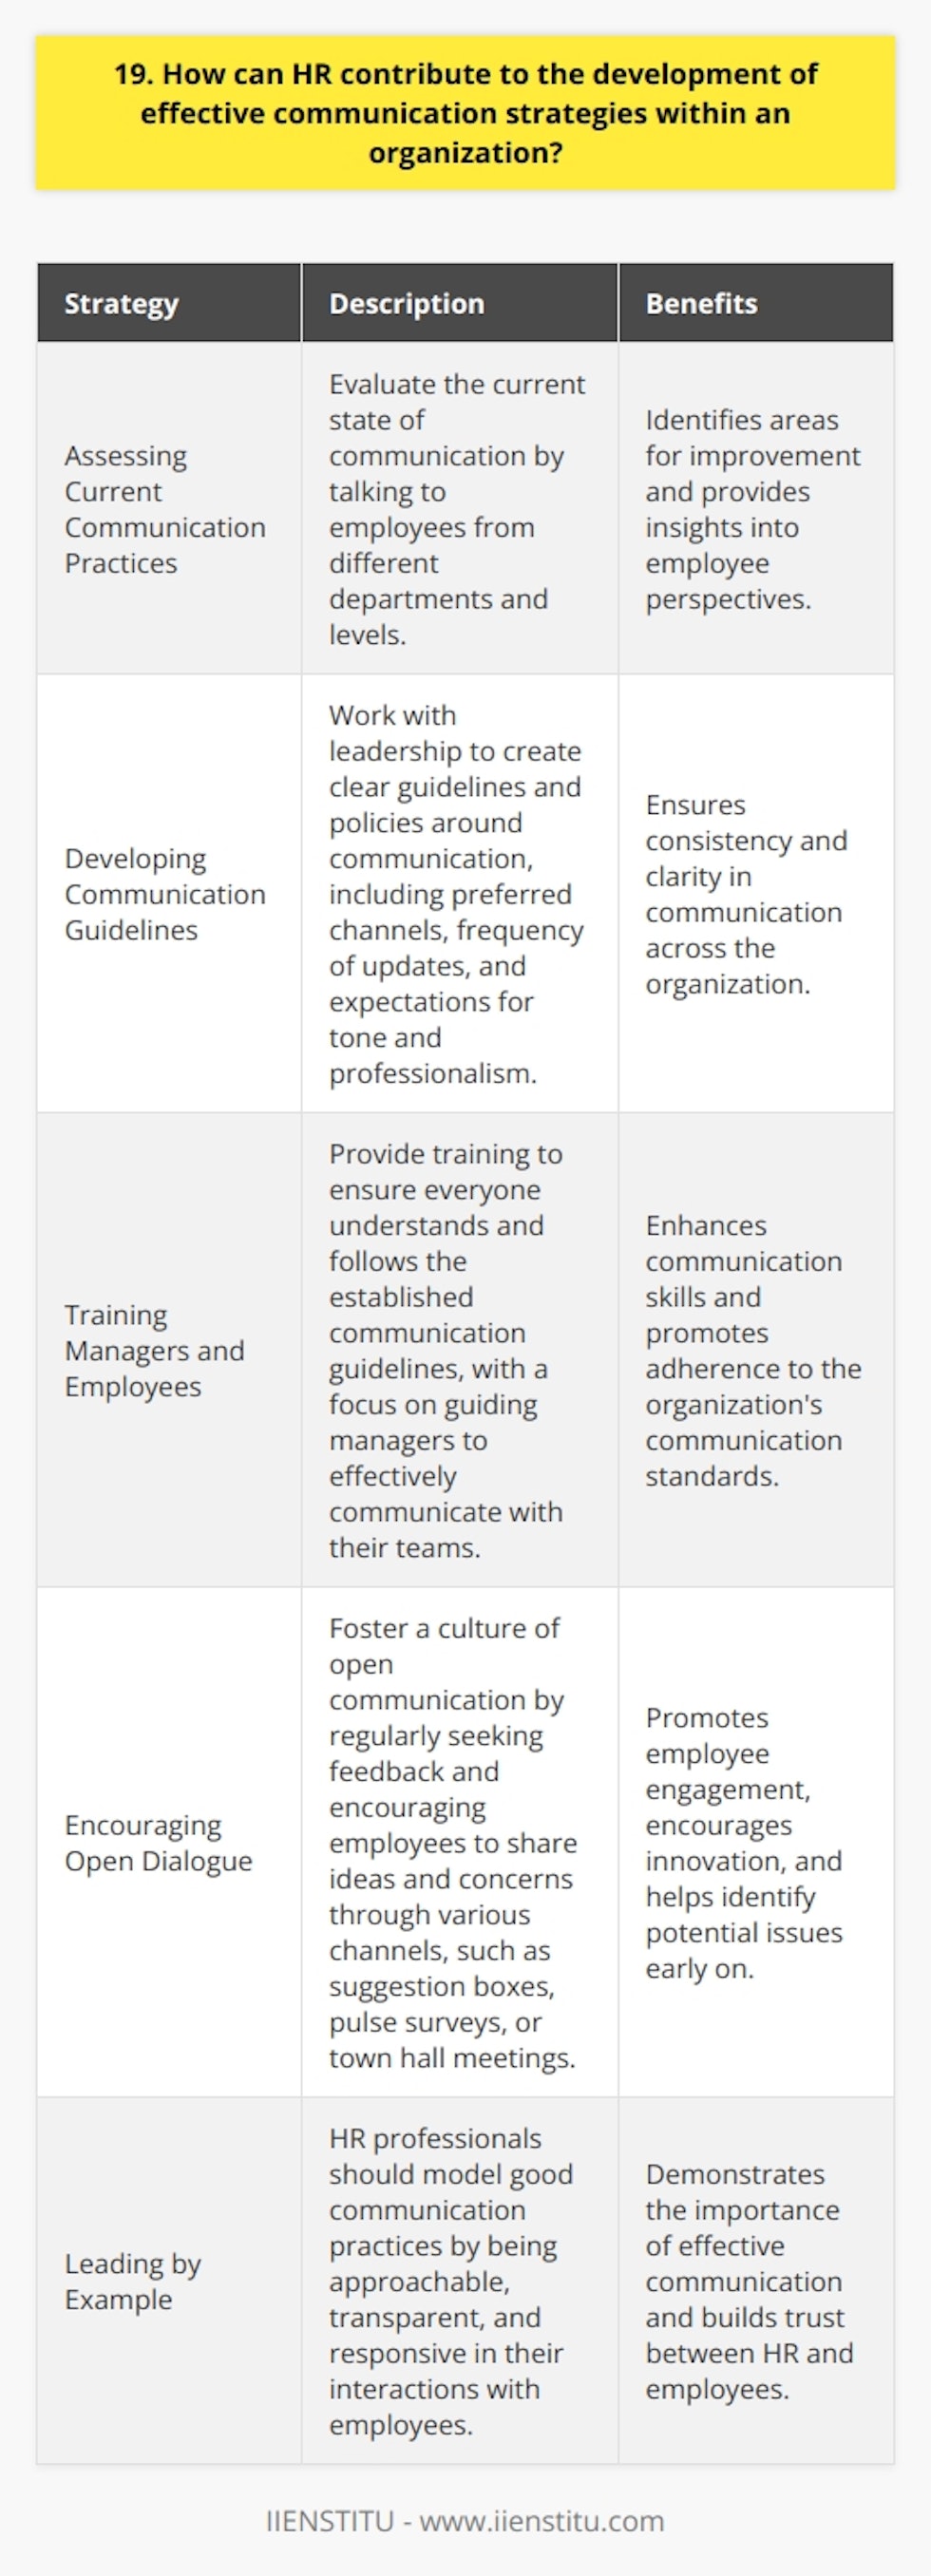 As an HR professional, I believe effective communication is crucial for any organizations success. HR can contribute to developing communication strategies in several ways: Assessing Current Communication Practices First, HR should evaluate the current state of communication within the company. This involves talking to employees from different departments and levels to understand their perspectives and identify areas for improvement. Developing Communication Guidelines Based on this assessment, HR can work with leadership to create clear guidelines and policies around communication. This might include preferred channels, frequency of updates, and expectations for tone and professionalism. Training Managers and Employees Once these guidelines are in place, HR should provide training to ensure everyone understands and follows them. Managers especially need guidance on effectively communicating with their teams. Encouraging Open Dialogue HR can foster a culture of open communication by regularly seeking feedback and encouraging employees to share ideas and concerns. This could involve suggestion boxes, pulse surveys, or town hall meetings. Leading by Example Finally, I think its important for HR to model good communication practices themselves. We should be approachable, transparent, and responsive in our interactions with employees. By taking these steps, HR can play a vital role in improving communication and collaboration across the organization. When everyone is on the same page, working towards shared goals, thats when the real magic happens!